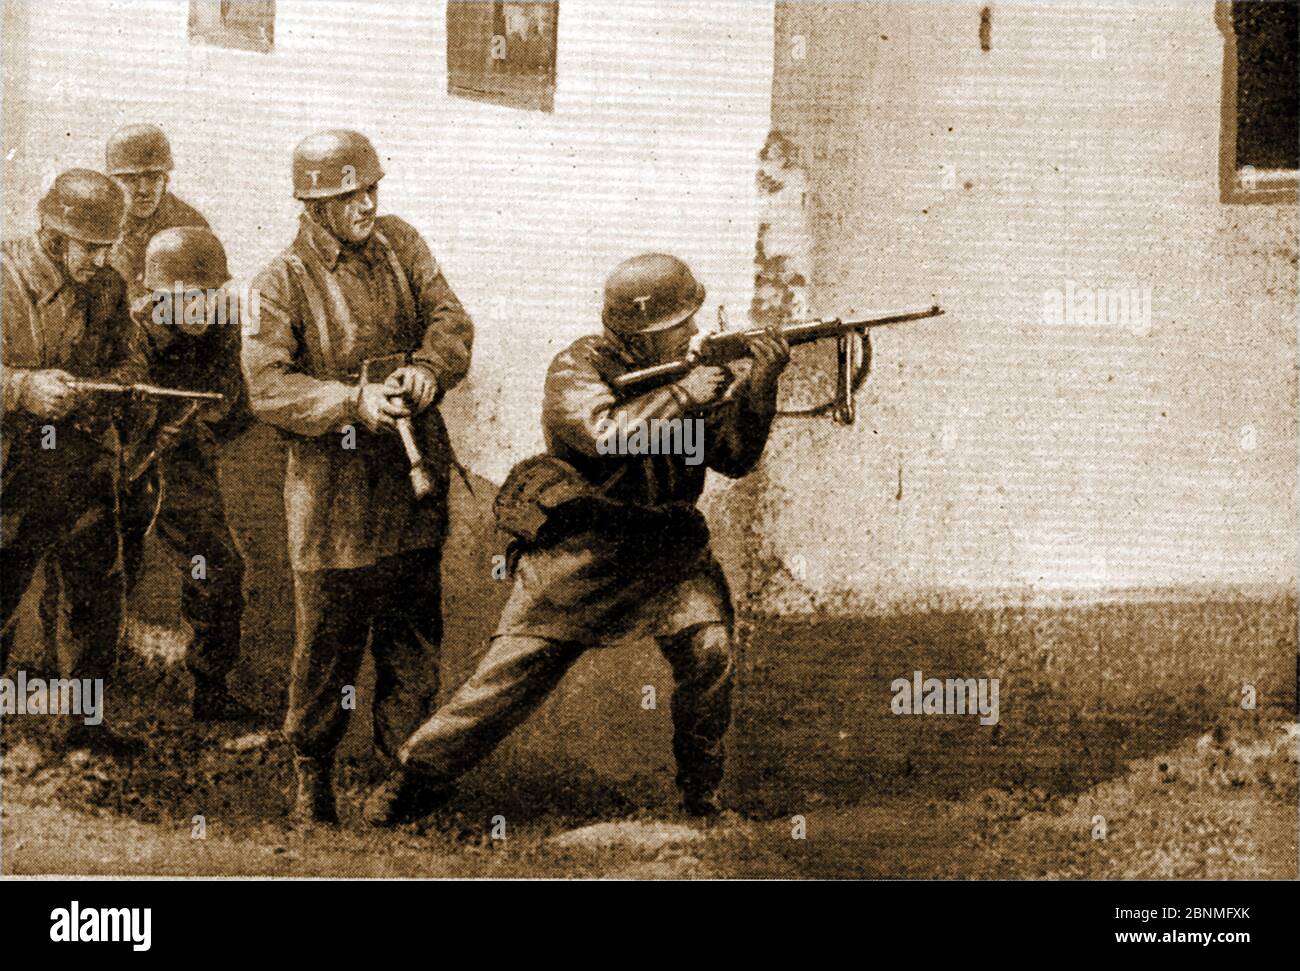 WWII -   Battle of Greece aka Operation Marita or Unternehmen Marita  - A printed image from 1941 showing Nazi German paratroopers in action in Corinth, Greece. One soldier shoots around the corner of a building whilst the man behind gets ready with a hand grenade.Operation Marita followed the  Italian invasion in October 1940. It is sometimes known as the Greco-Italian War. Stock Photo